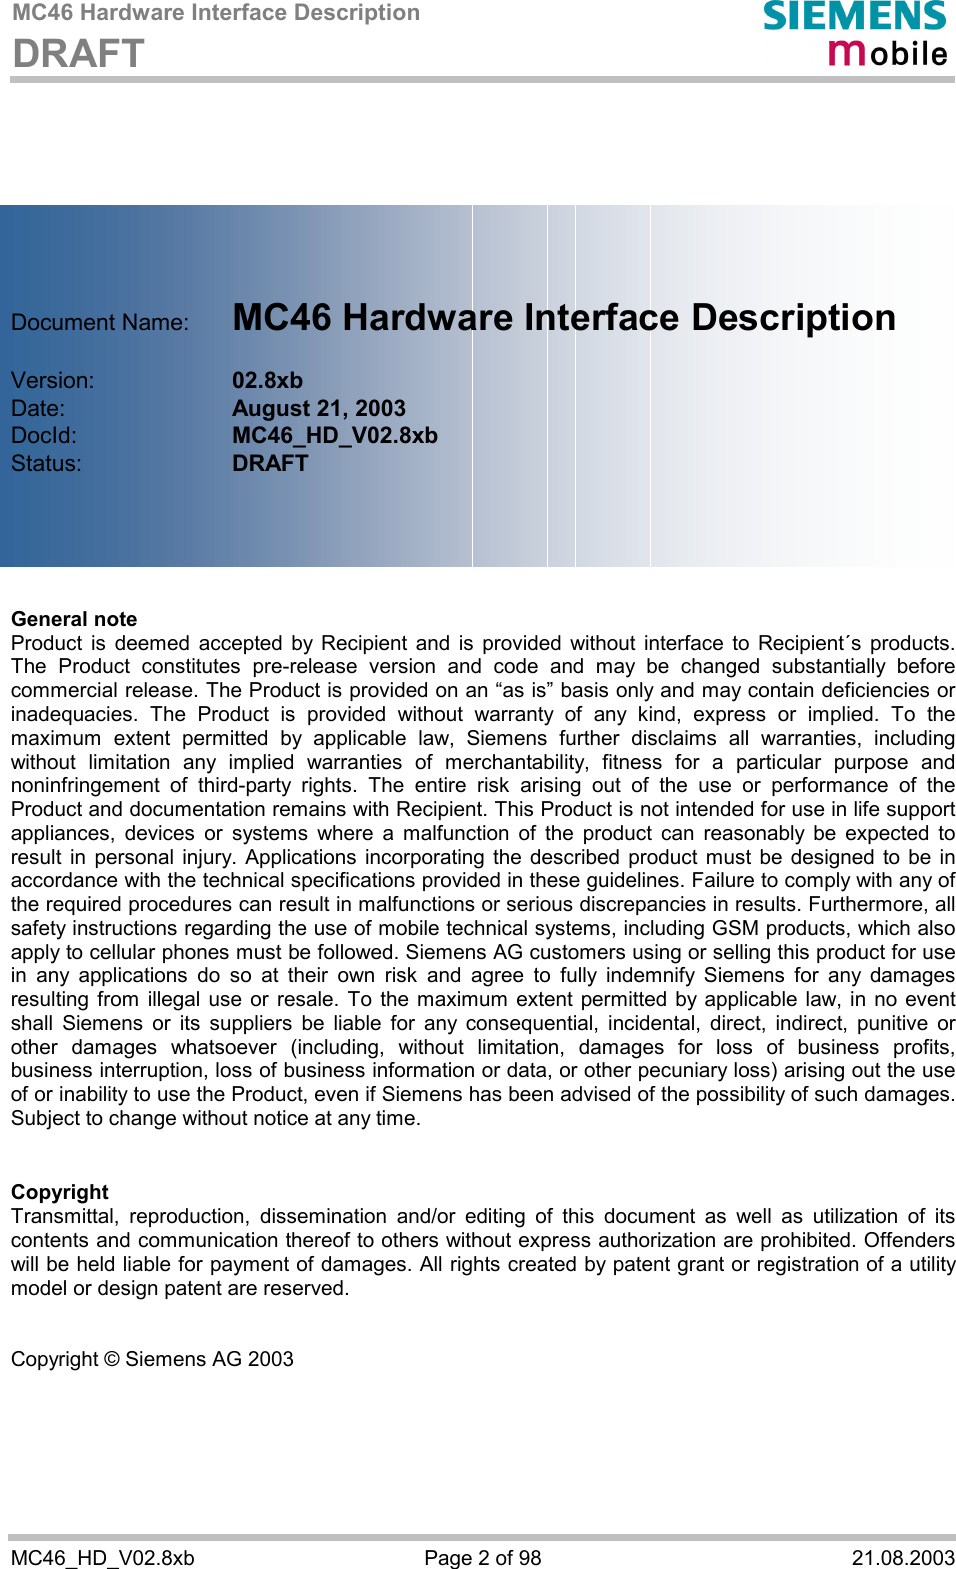 MC46 Hardware Interface Description DRAFT      MC46_HD_V02.8xb  Page 2 of 98  21.08.2003        Document Name:   MC46 Hardware Interface Description  Version:     02.8xb Date:       August 21, 2003 DocId:     MC46_HD_V02.8xb Status:     DRAFT      General note Product is deemed accepted by Recipient and is provided without interface to Recipient´s products. The Product constitutes pre-release version and code and may be changed substantially before commercial release. The Product is provided on an “as is” basis only and may contain deficiencies or inadequacies. The Product is provided without warranty of any kind, express or implied. To the maximum extent permitted by applicable law, Siemens further disclaims all warranties, including without limitation any implied warranties of merchantability, fitness for a particular purpose and noninfringement of third-party rights. The entire risk arising out of the use or performance of the Product and documentation remains with Recipient. This Product is not intended for use in life support appliances, devices or systems where a malfunction of the product can reasonably be expected to result in personal injury. Applications incorporating the described product must be designed to be in accordance with the technical specifications provided in these guidelines. Failure to comply with any of the required procedures can result in malfunctions or serious discrepancies in results. Furthermore, all safety instructions regarding the use of mobile technical systems, including GSM products, which also apply to cellular phones must be followed. Siemens AG customers using or selling this product for use in any applications do so at their own risk and agree to fully indemnify Siemens for any damages resulting from illegal use or resale. To the maximum extent permitted by applicable law, in no event shall Siemens or its suppliers be liable for any consequential, incidental, direct, indirect, punitive or other damages whatsoever (including, without limitation, damages for loss of business profits, business interruption, loss of business information or data, or other pecuniary loss) arising out the use of or inability to use the Product, even if Siemens has been advised of the possibility of such damages. Subject to change without notice at any time.   Copyright Transmittal, reproduction, dissemination and/or editing of this document as well as utilization of its contents and communication thereof to others without express authorization are prohibited. Offenders will be held liable for payment of damages. All rights created by patent grant or registration of a utility model or design patent are reserved.   Copyright © Siemens AG 2003 